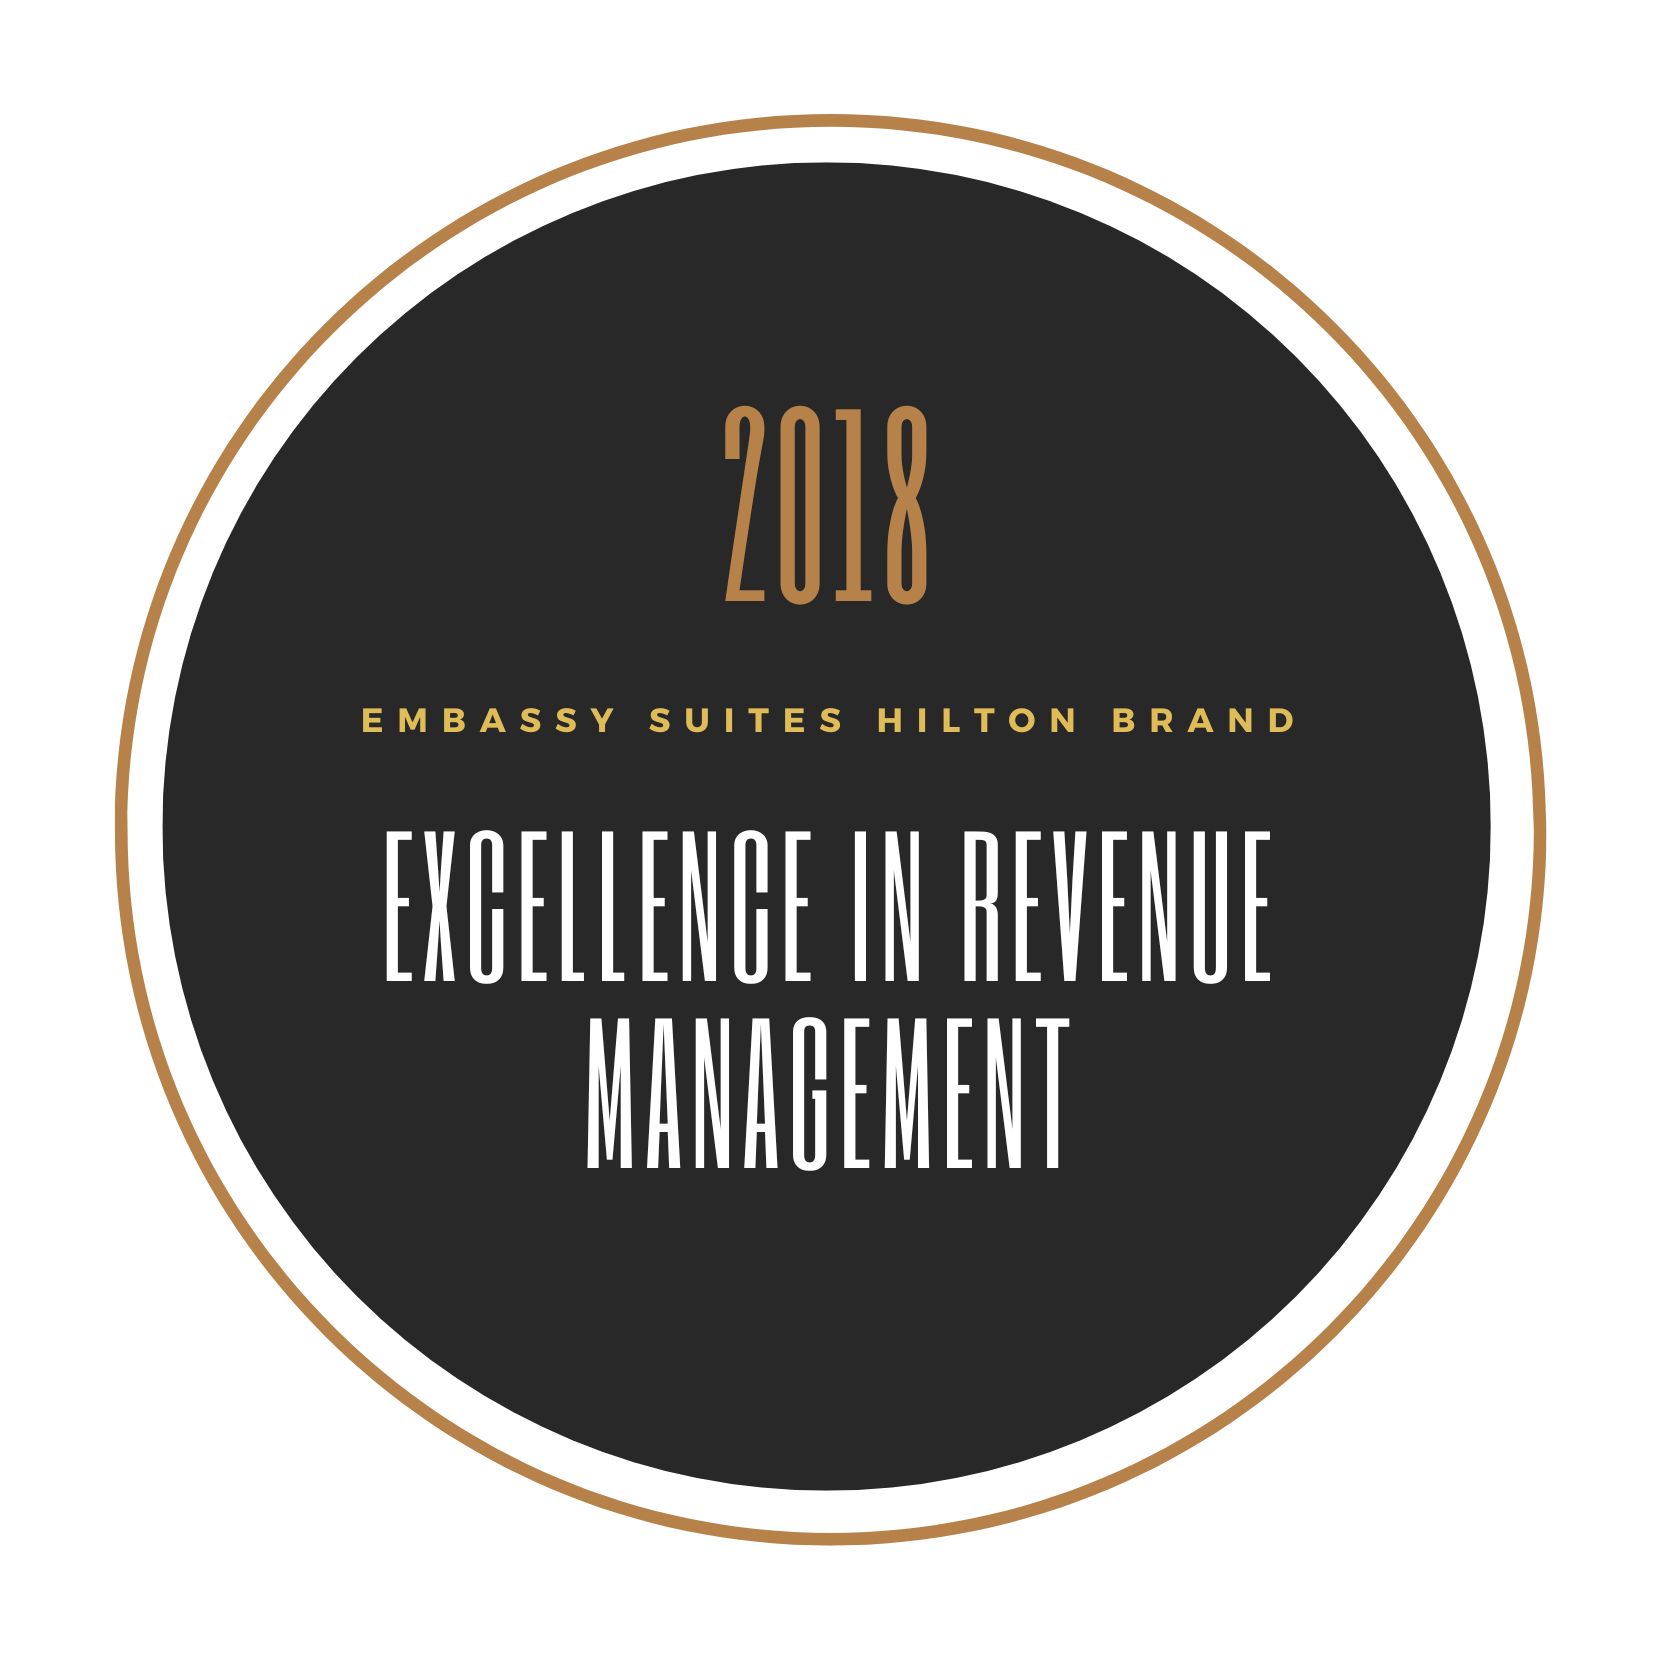 Excellence in Revenue Management